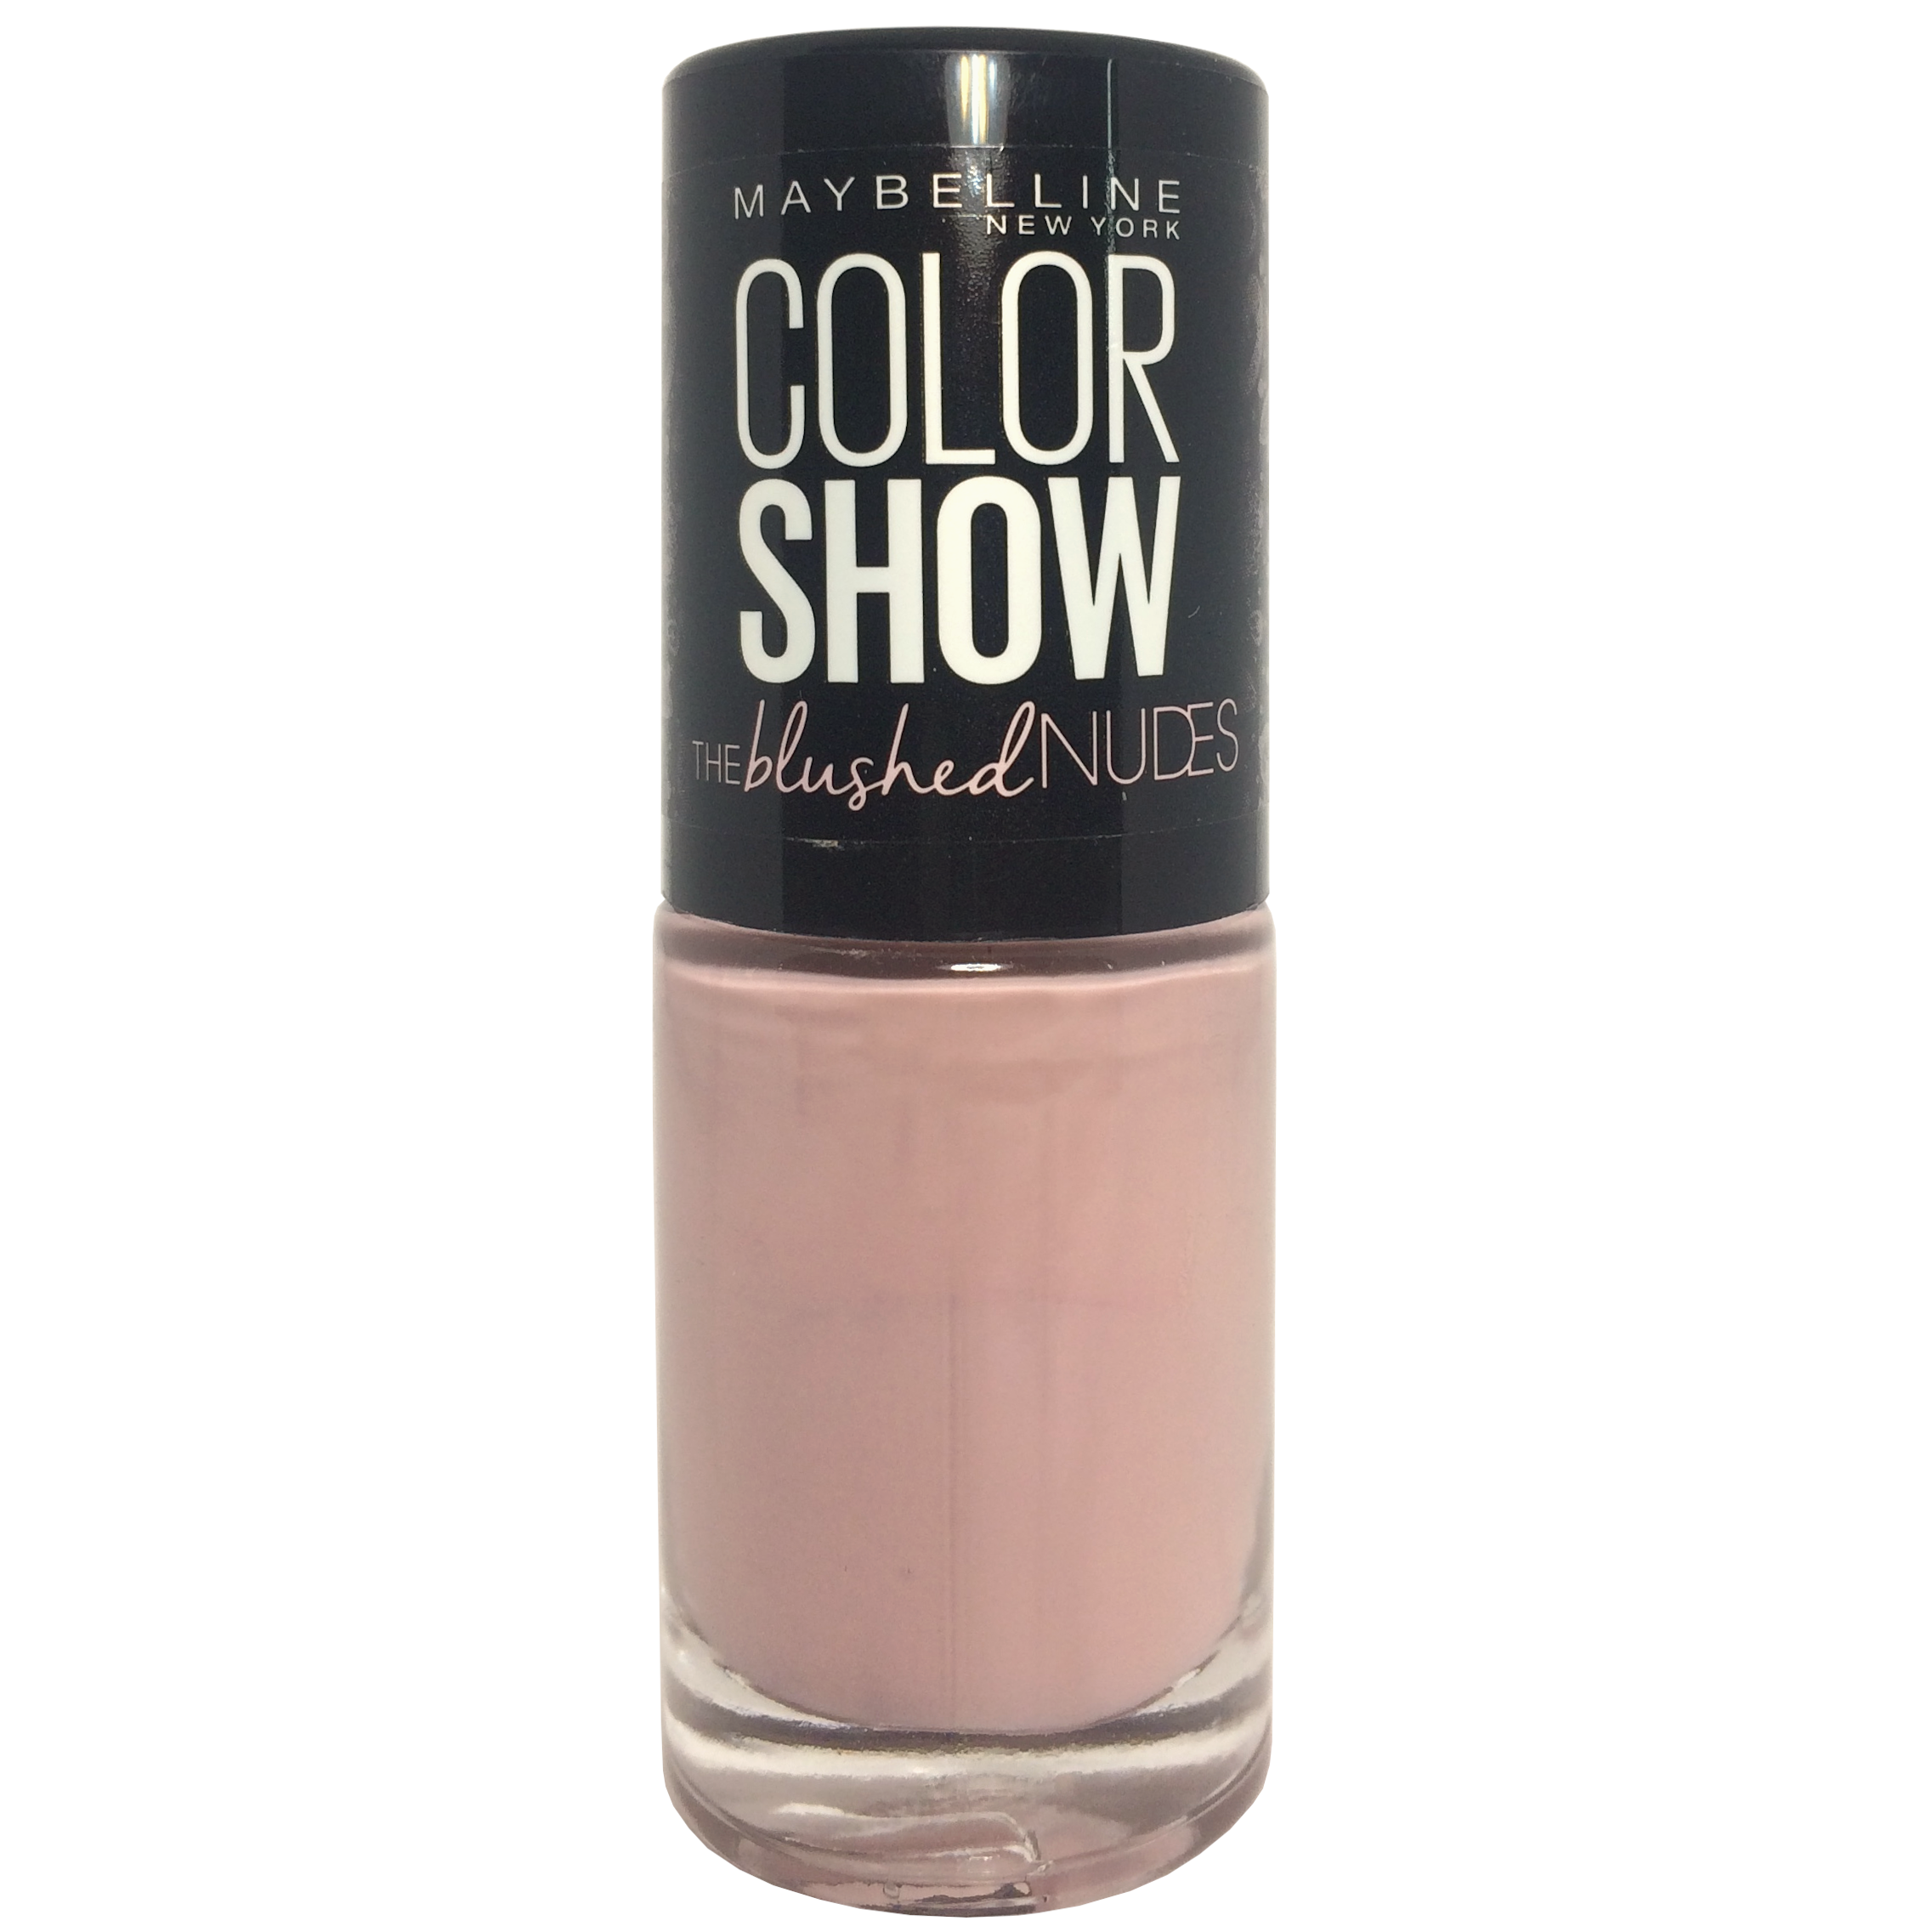 Maybelline Color Show The Blushed Nudes Nail Polish 447 Dusty Rose